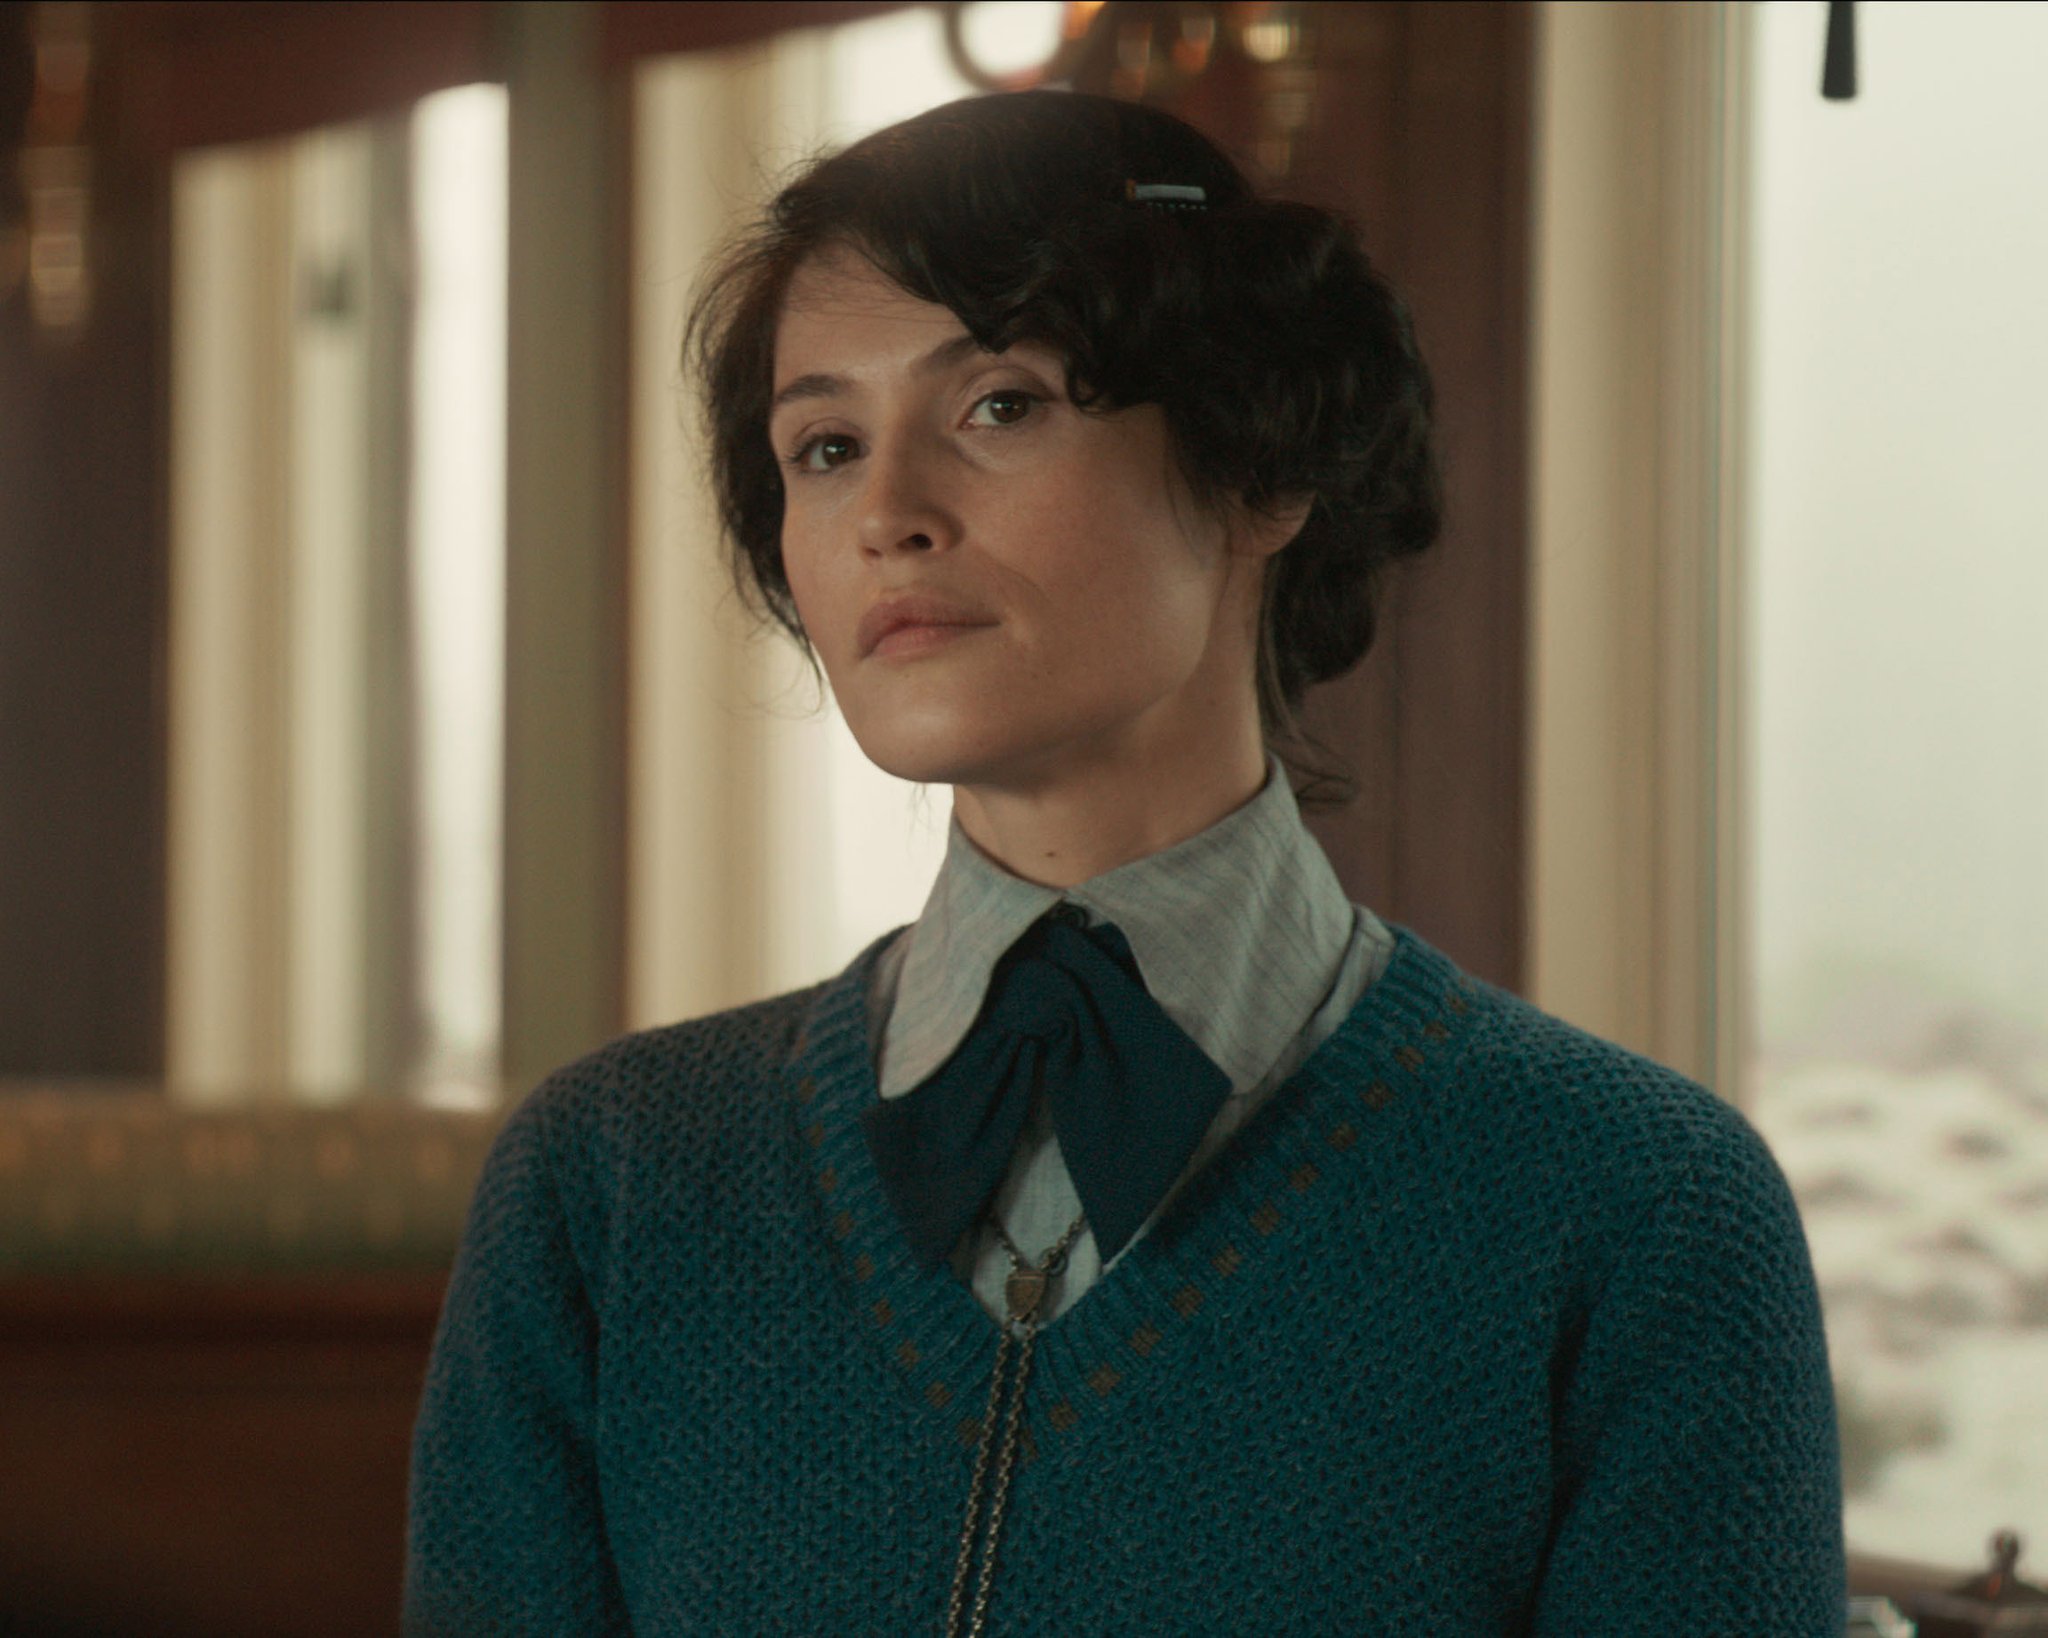 Did you forget your manners? Wish a happy birthday to Gemma Arterton! 